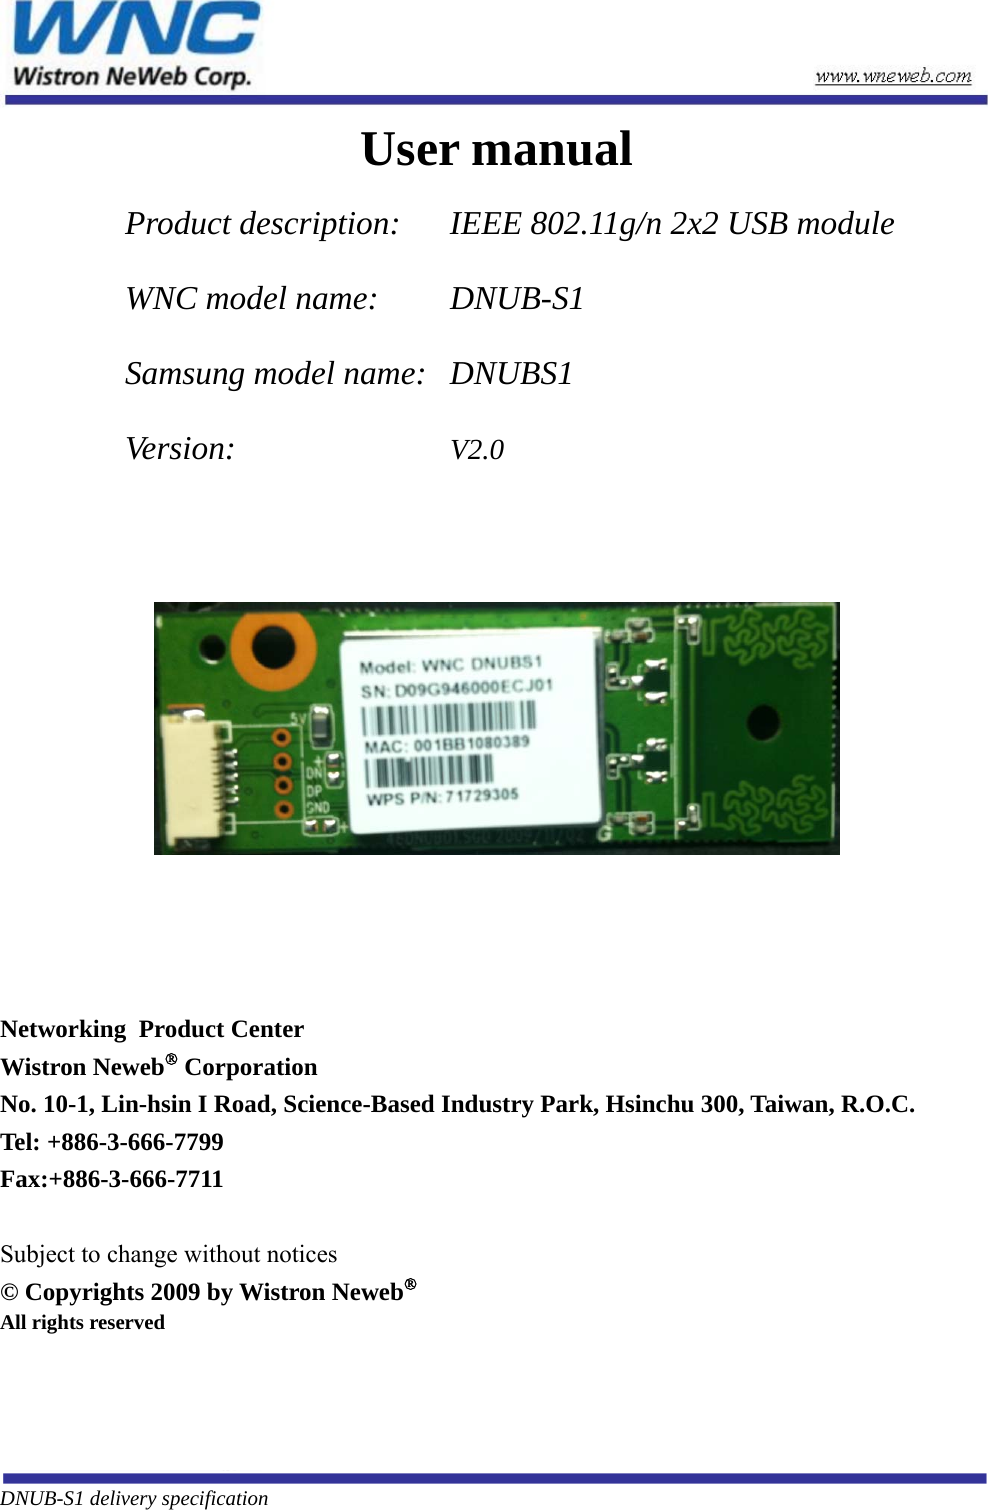  User manual  Product description:   IEEE 802.11g/n 2x2 USB module WNC model name:    DNUB-S1 Samsung model name:   DNUBS1 Version:      V2.0       Networking  Product Center Wistron Neweb® Corporation No. 10-1, Lin-hsin I Road, Science-Based Industry Park, Hsinchu 300, Taiwan, R.O.C. Tel: +886-3-666-7799 Fax:+886-3-666-7711  Subject to change without notices © Copyrights 2009 by Wistron Neweb®All rights reserved  DNUB-S1 delivery specification        